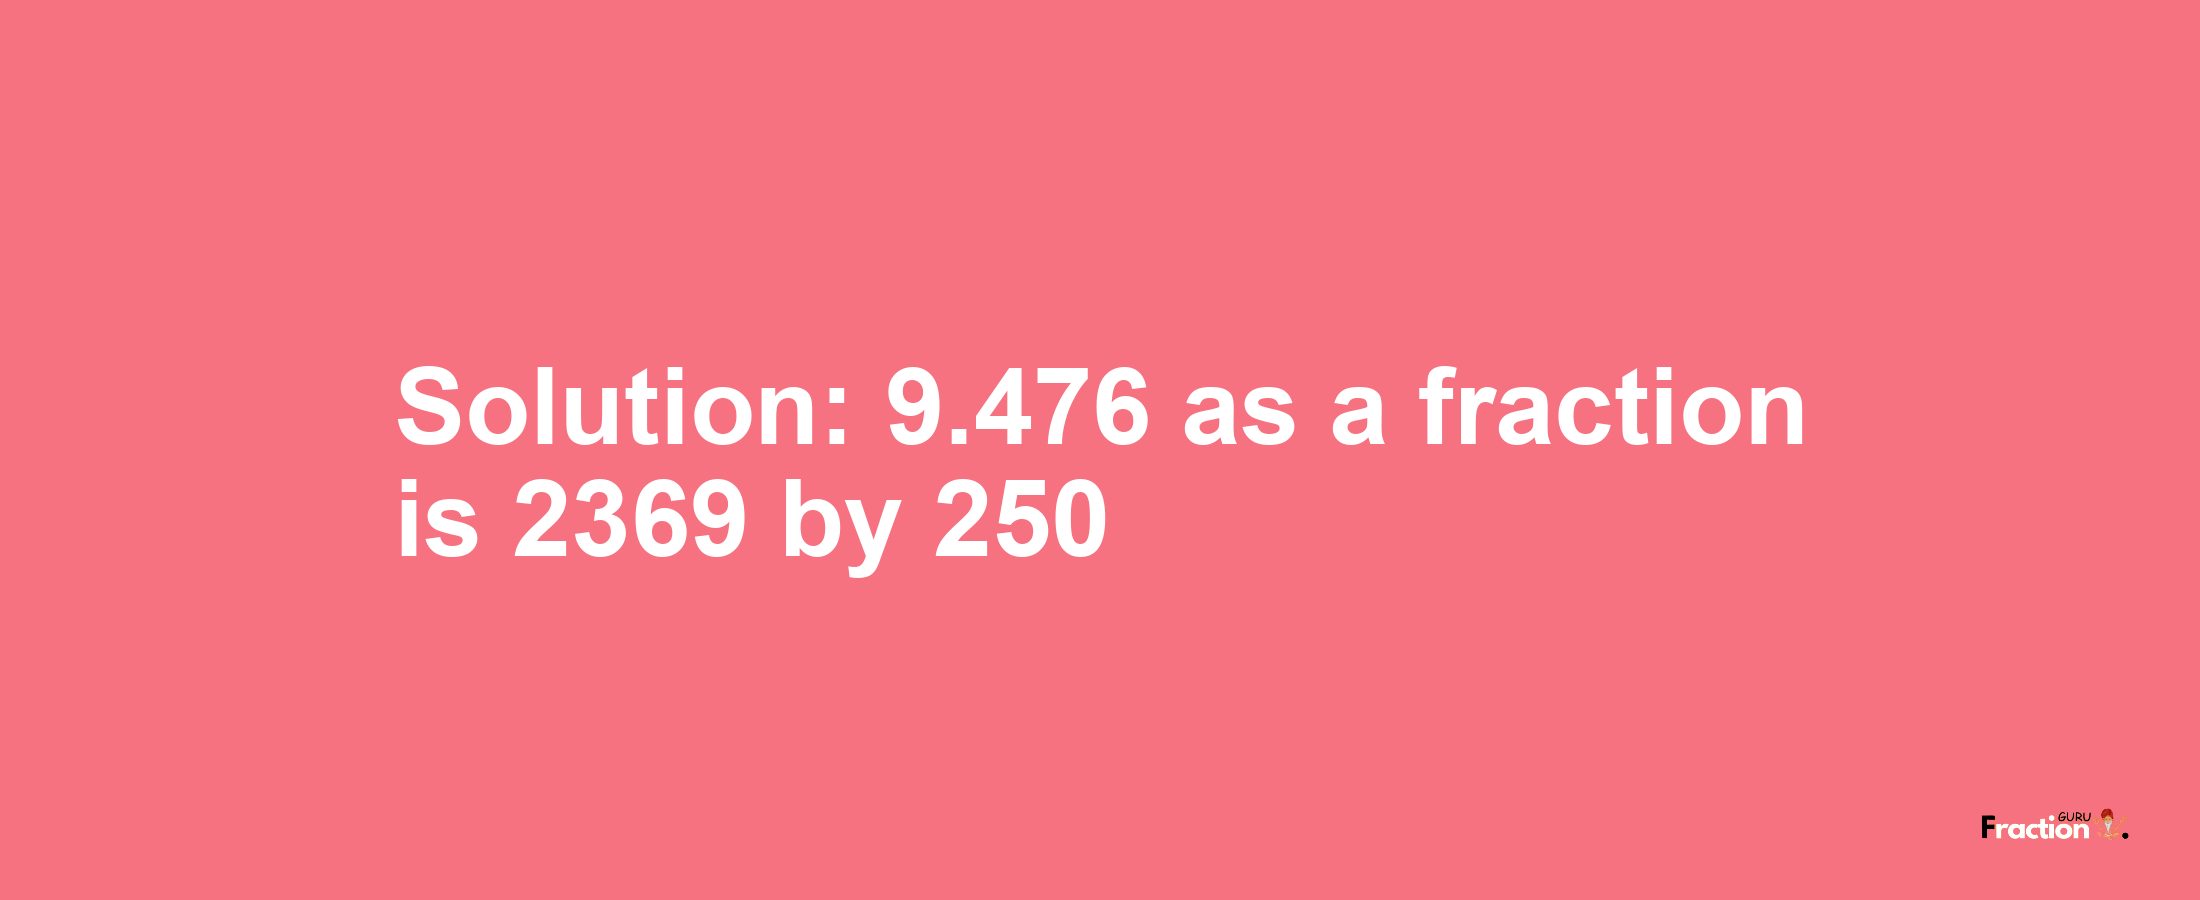 Solution:9.476 as a fraction is 2369/250